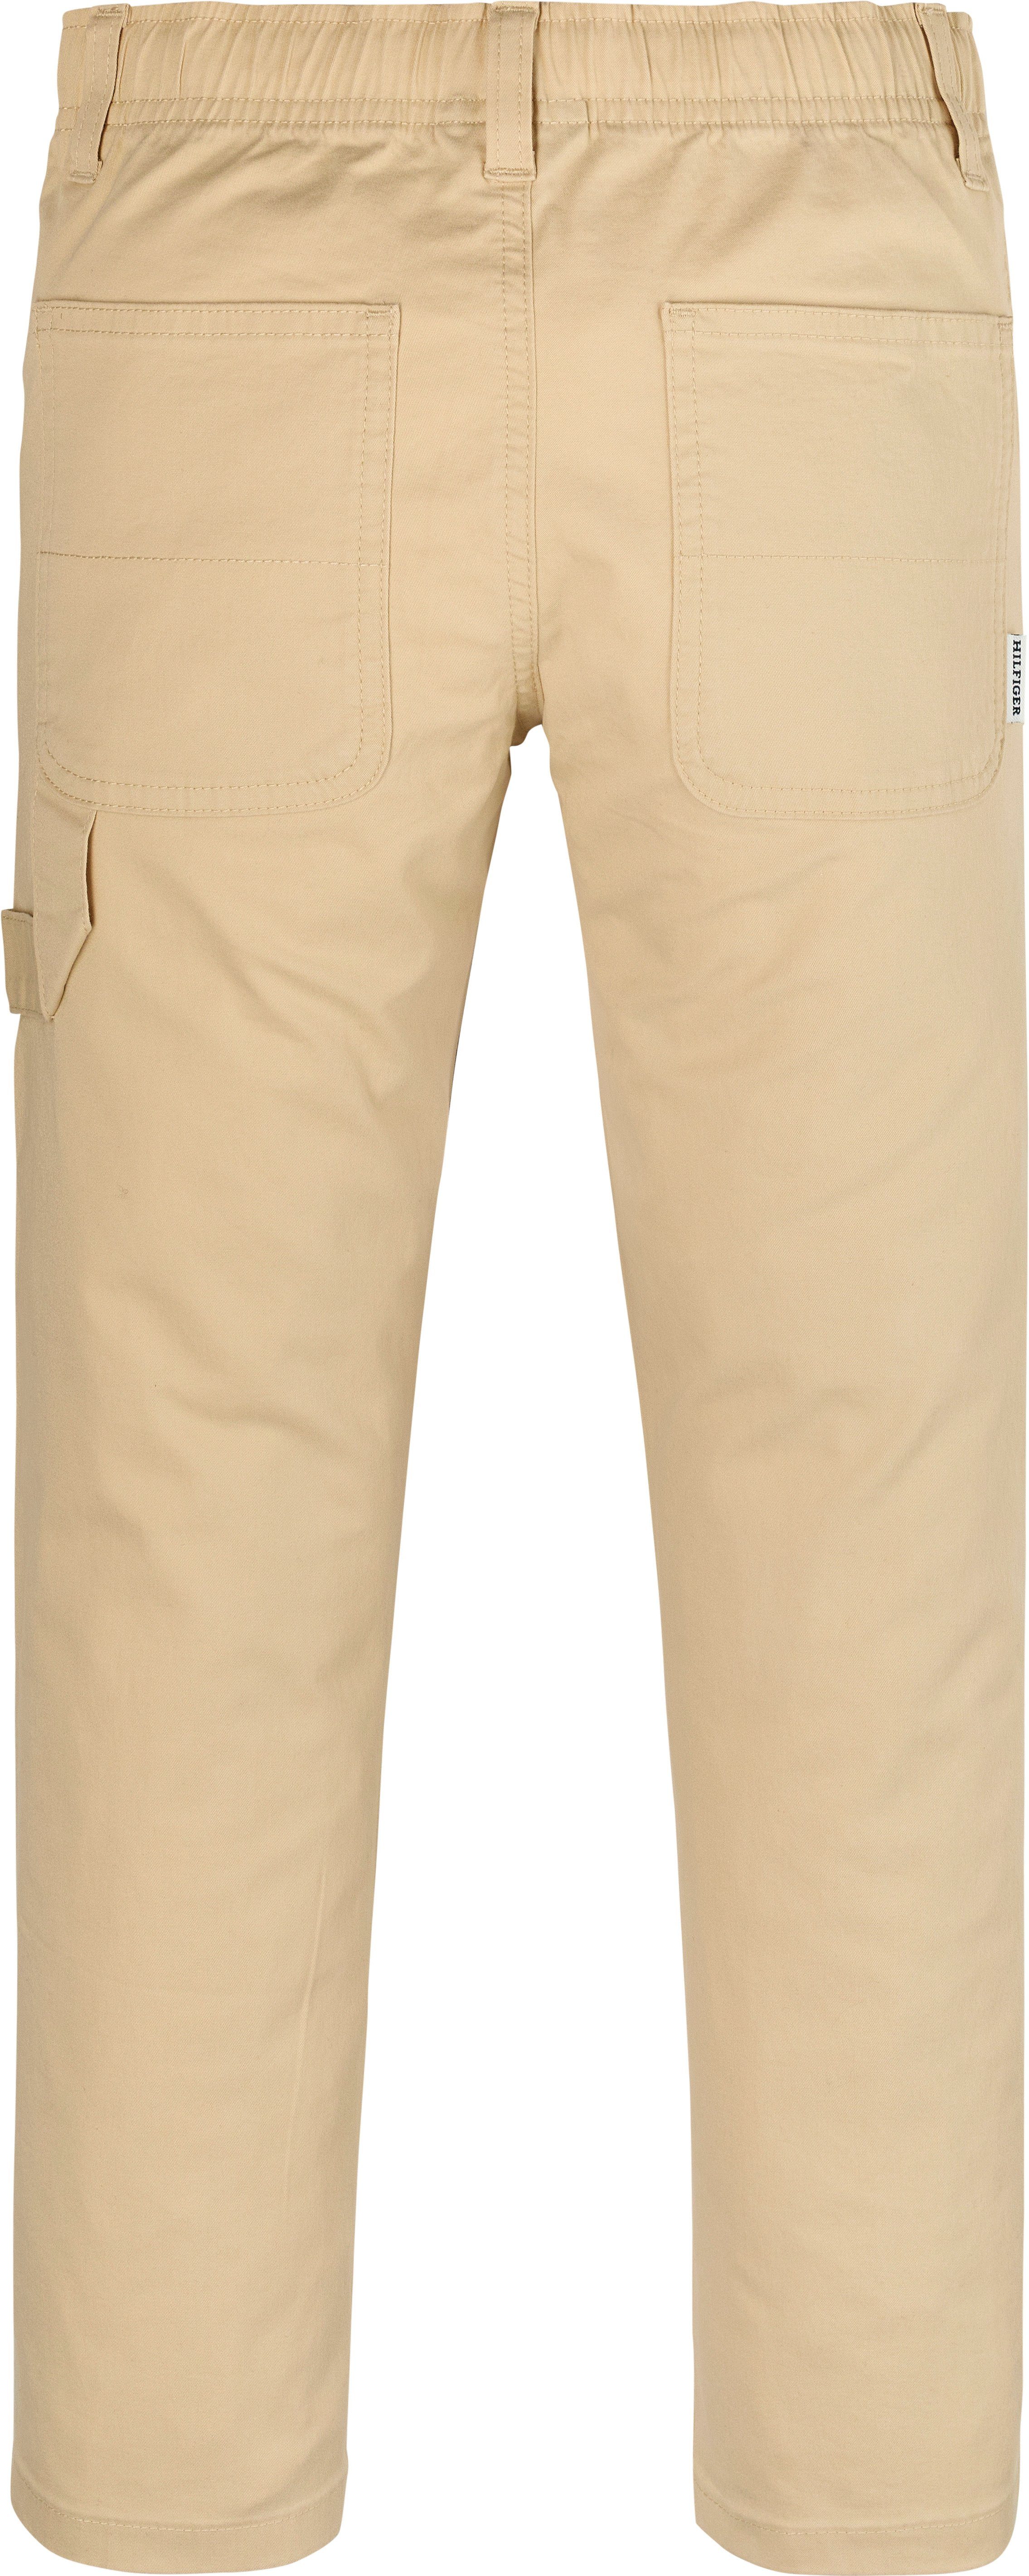 PANTS PULL SKATER mit Webhose Logostickerei ON Tommy Hilfiger WOVEN